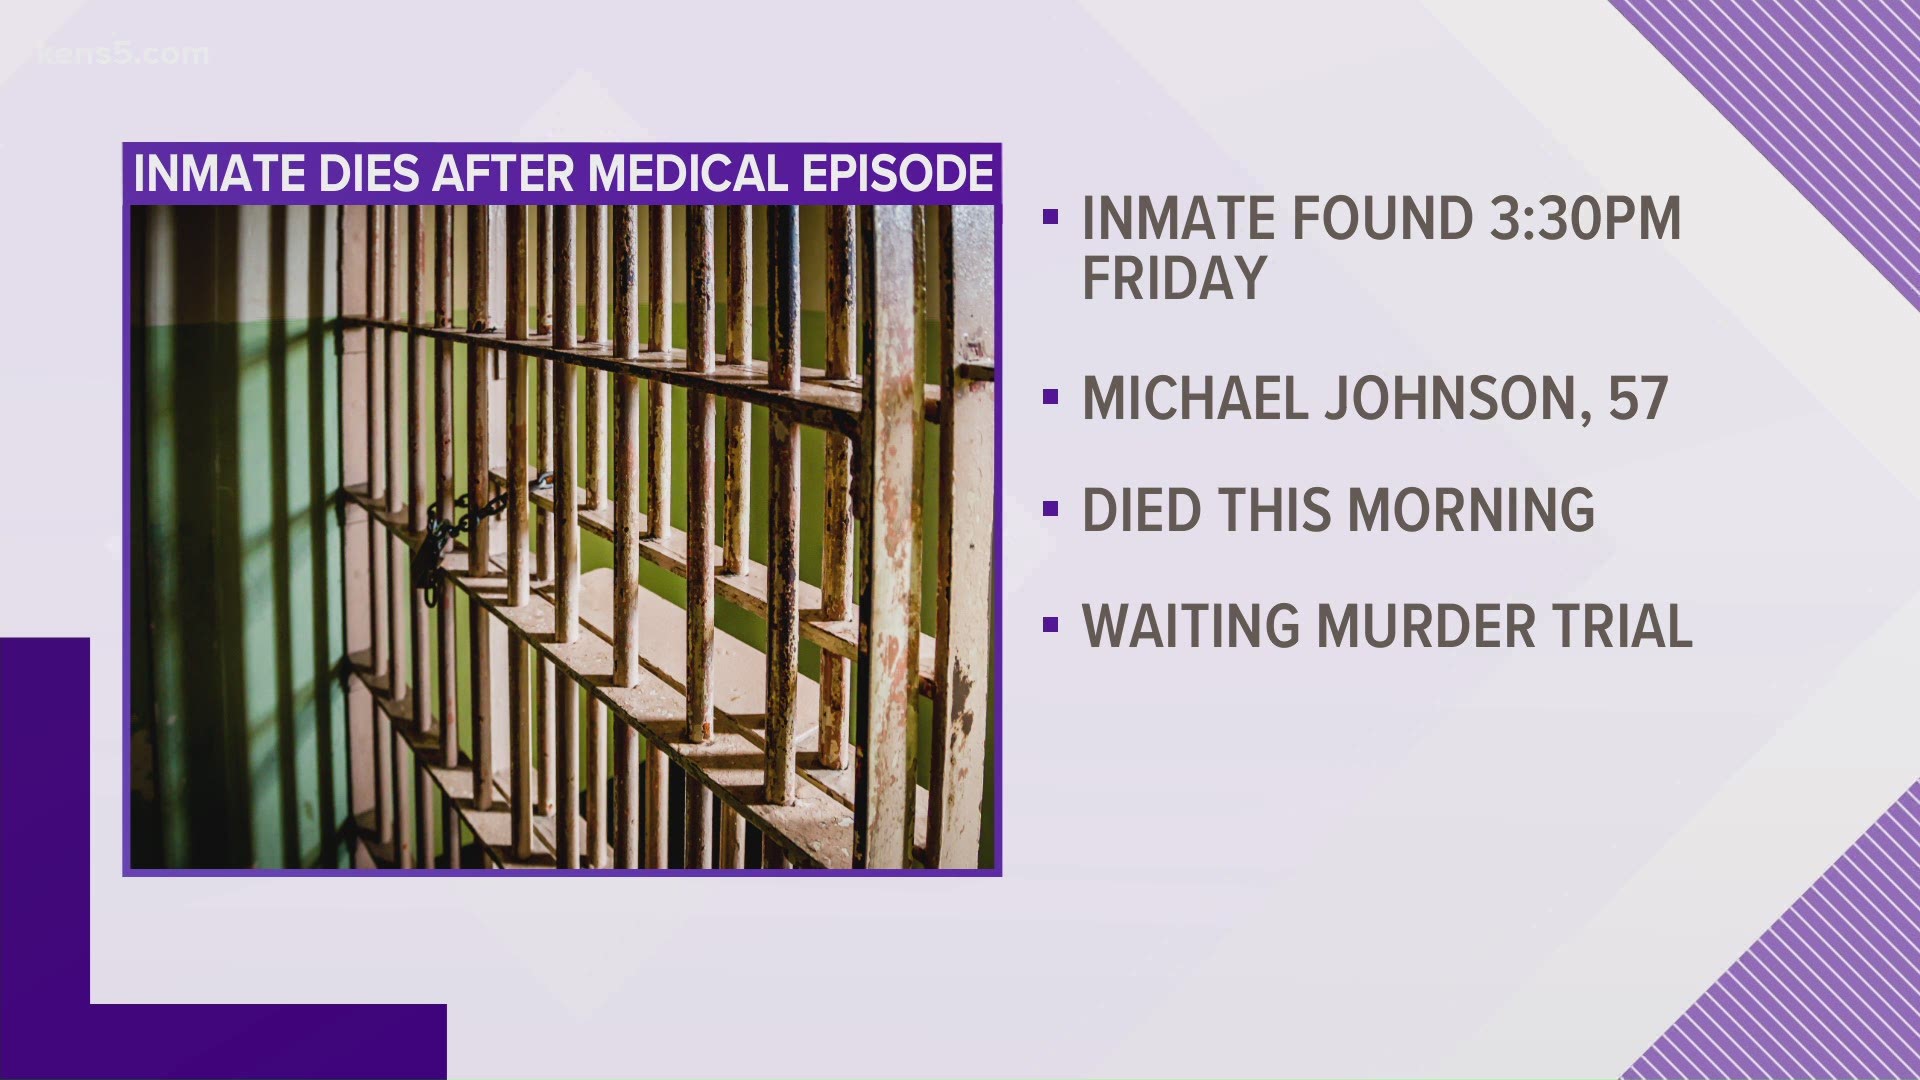 The 57-year-old inmate had been behind bars for more than three years and was awaiting trial.